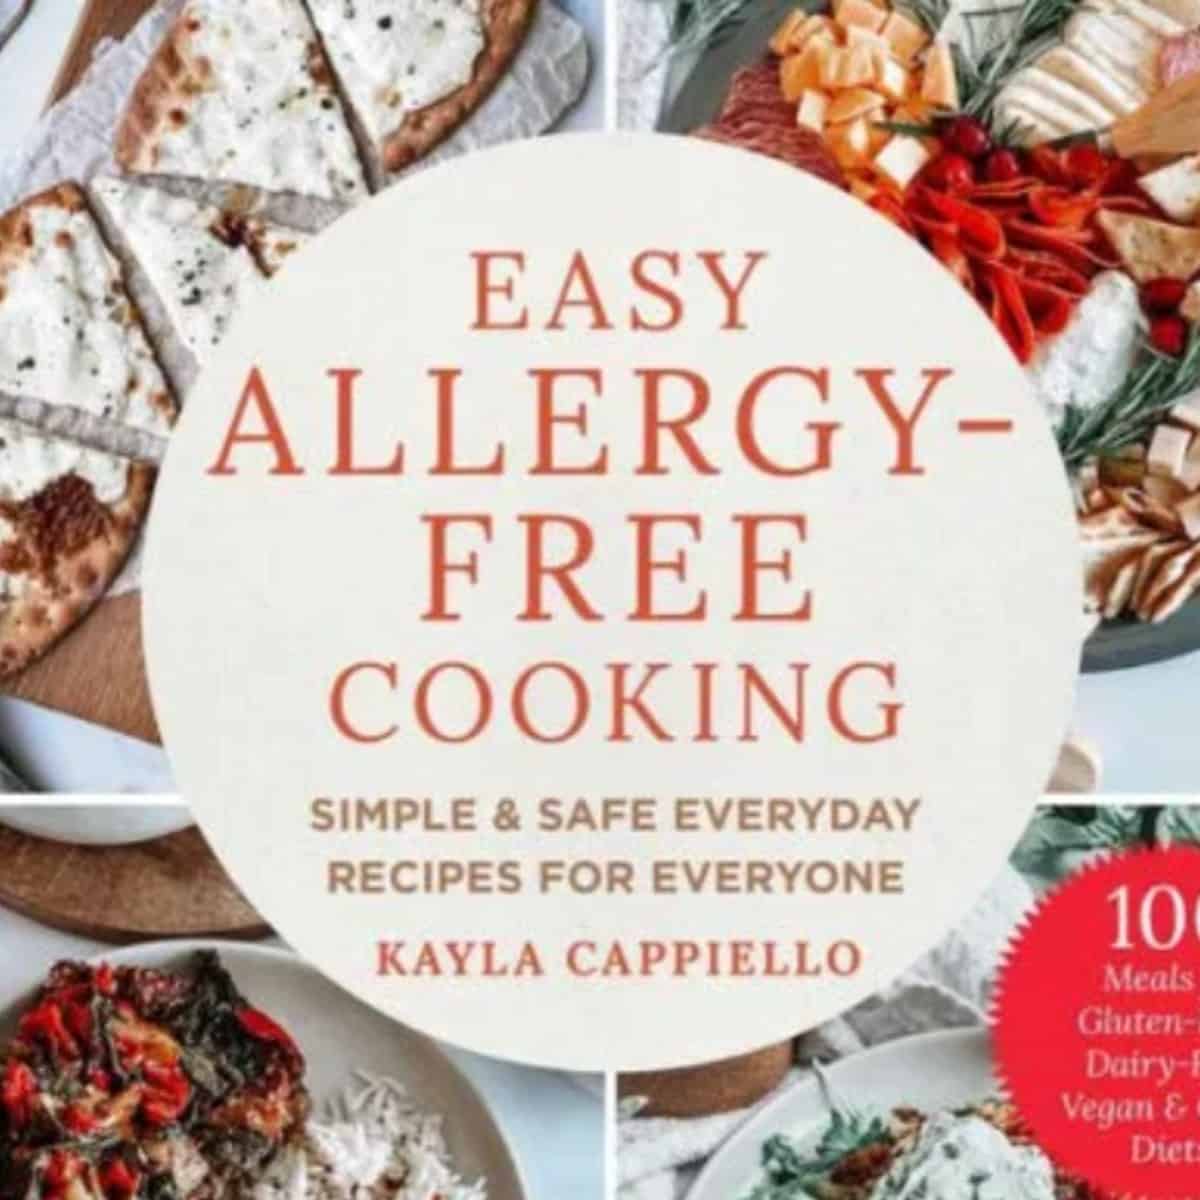 Allergy free cooking